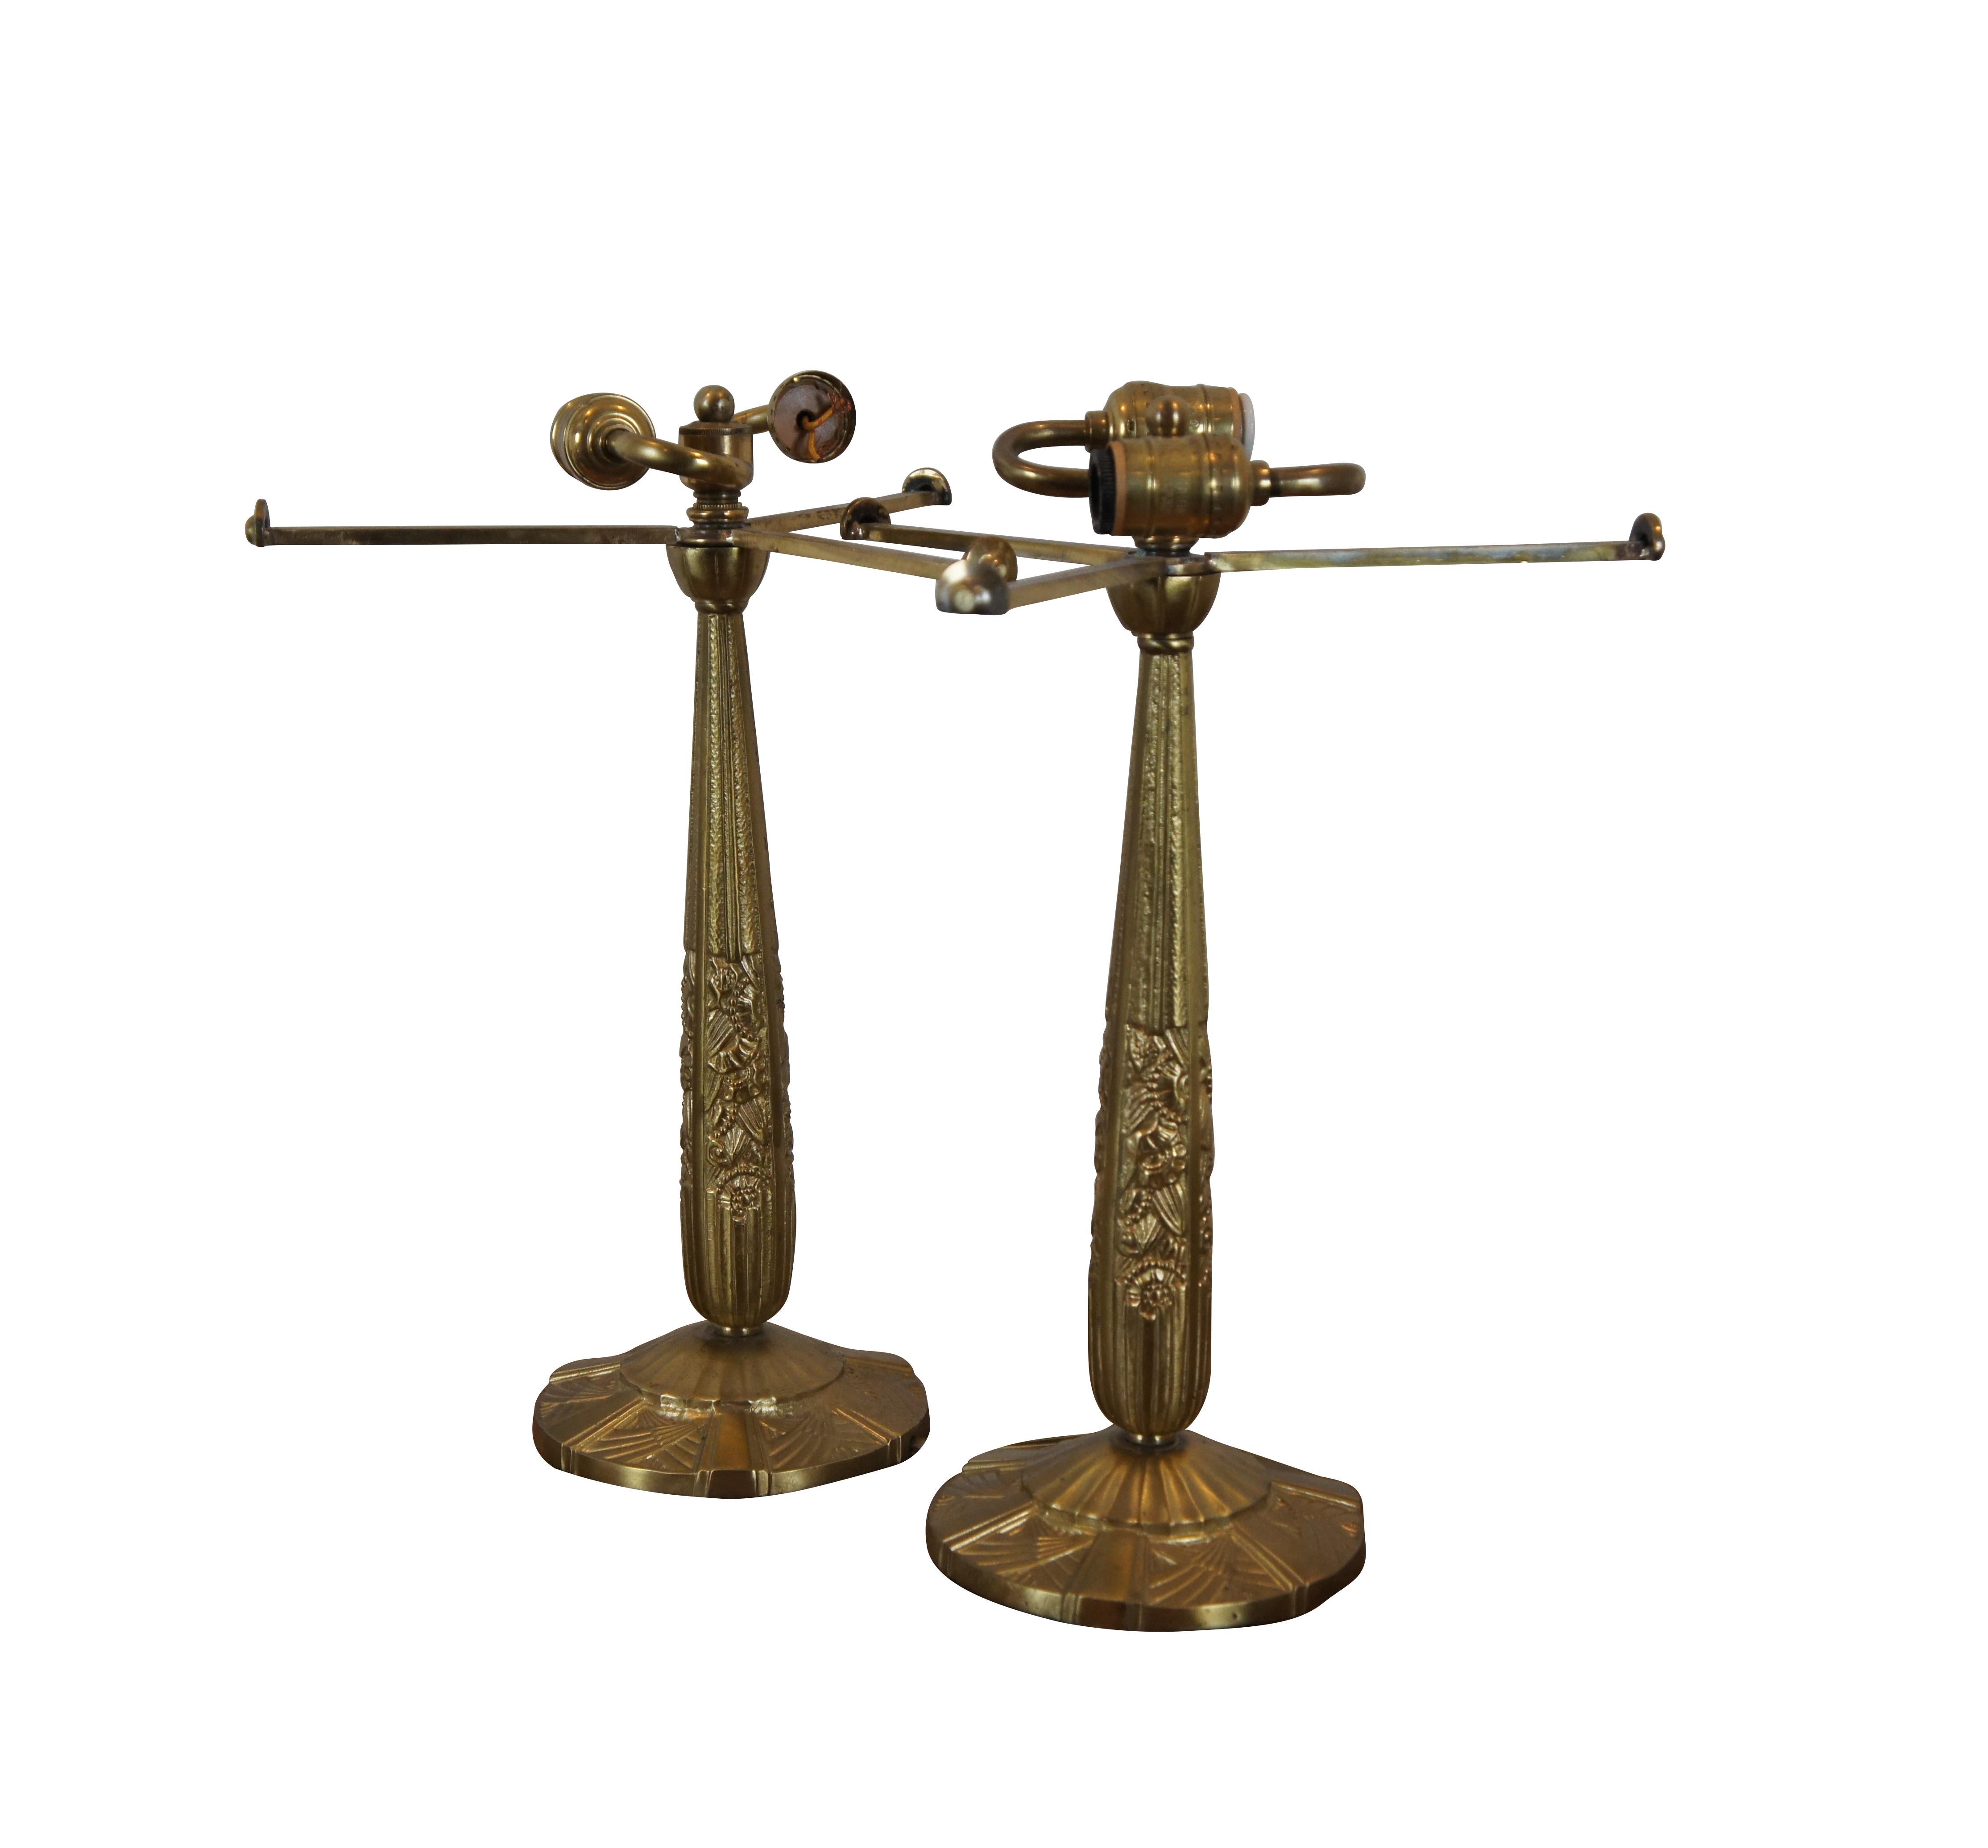 2 Antique French Art Deco Heavy Bronze 2 Light Library Table Lamp Bases In Good Condition For Sale In Dayton, OH